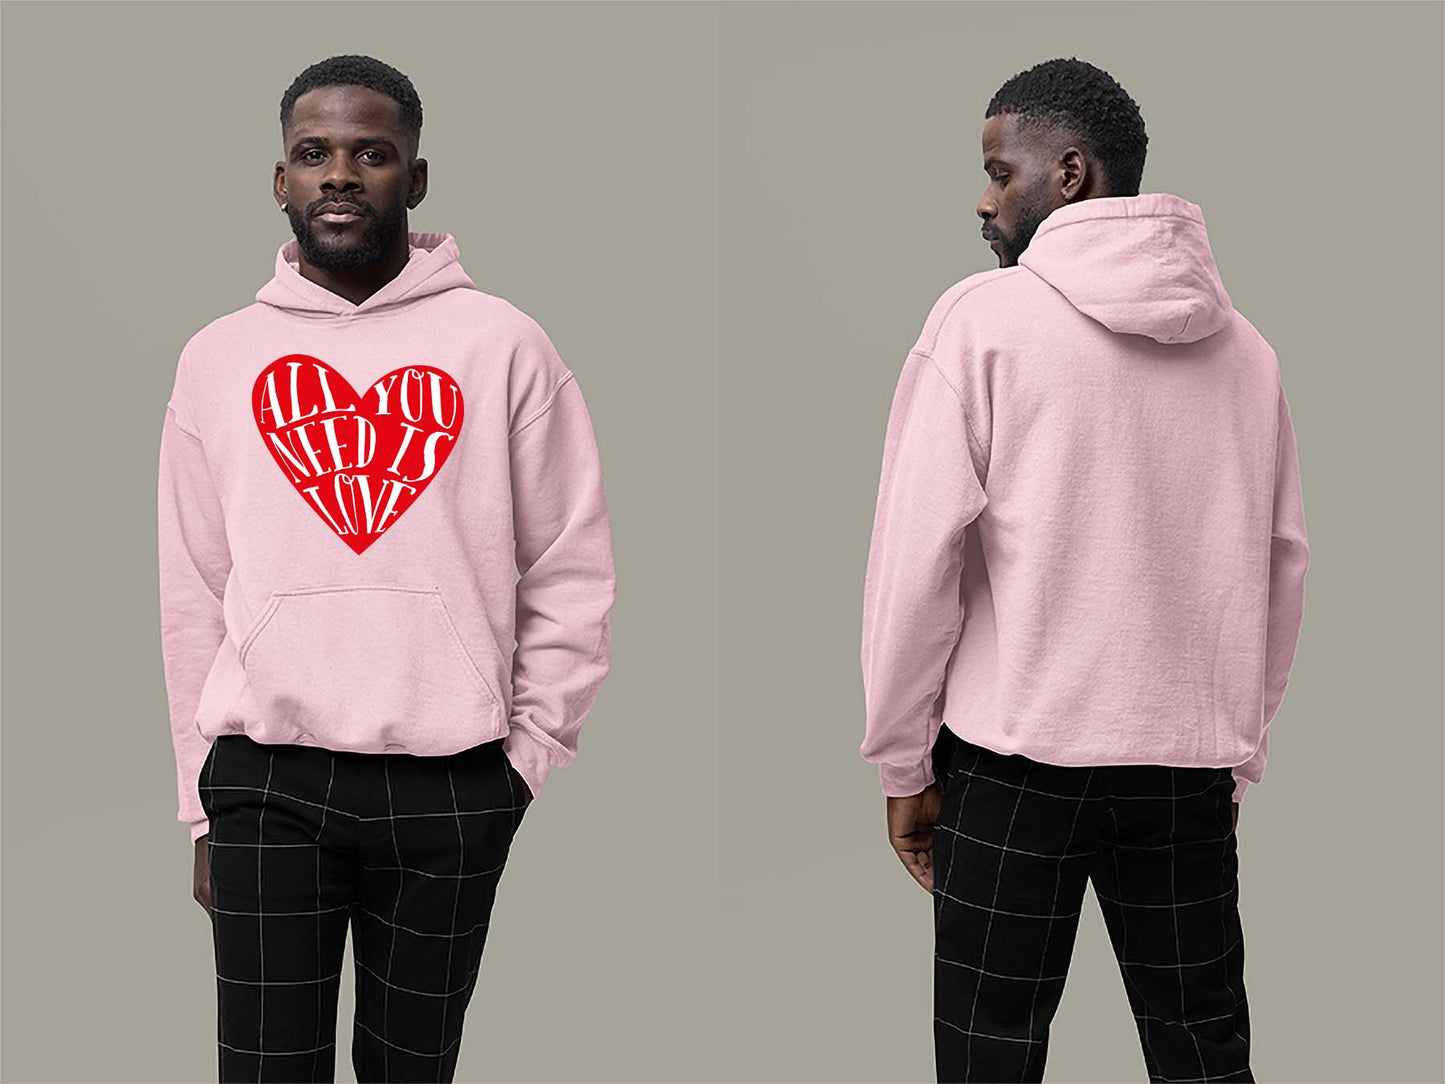 Fat Dave All You Need is Love Hoodie Small Light Pink